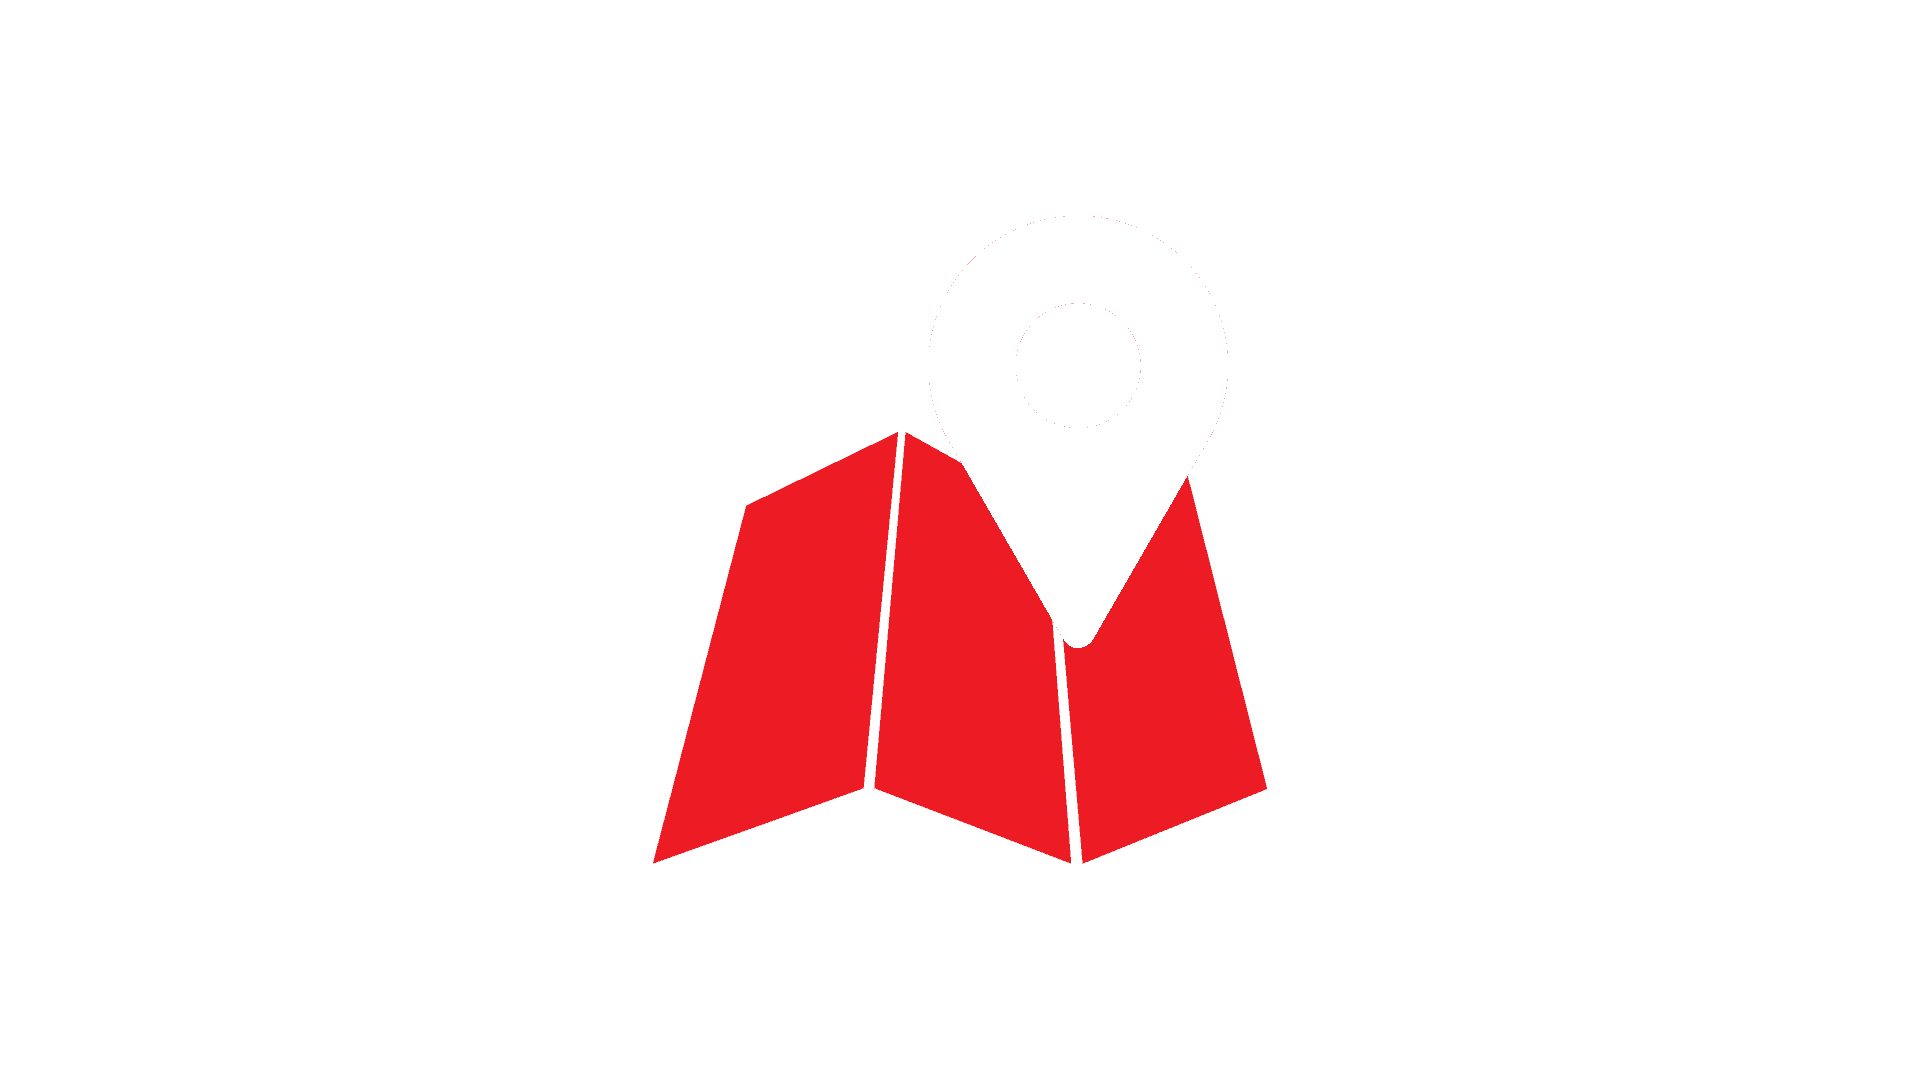 A white map pin icon above a red folded map symbol, set against a red background, perfectly marks the spot for efficient propane delivery services.